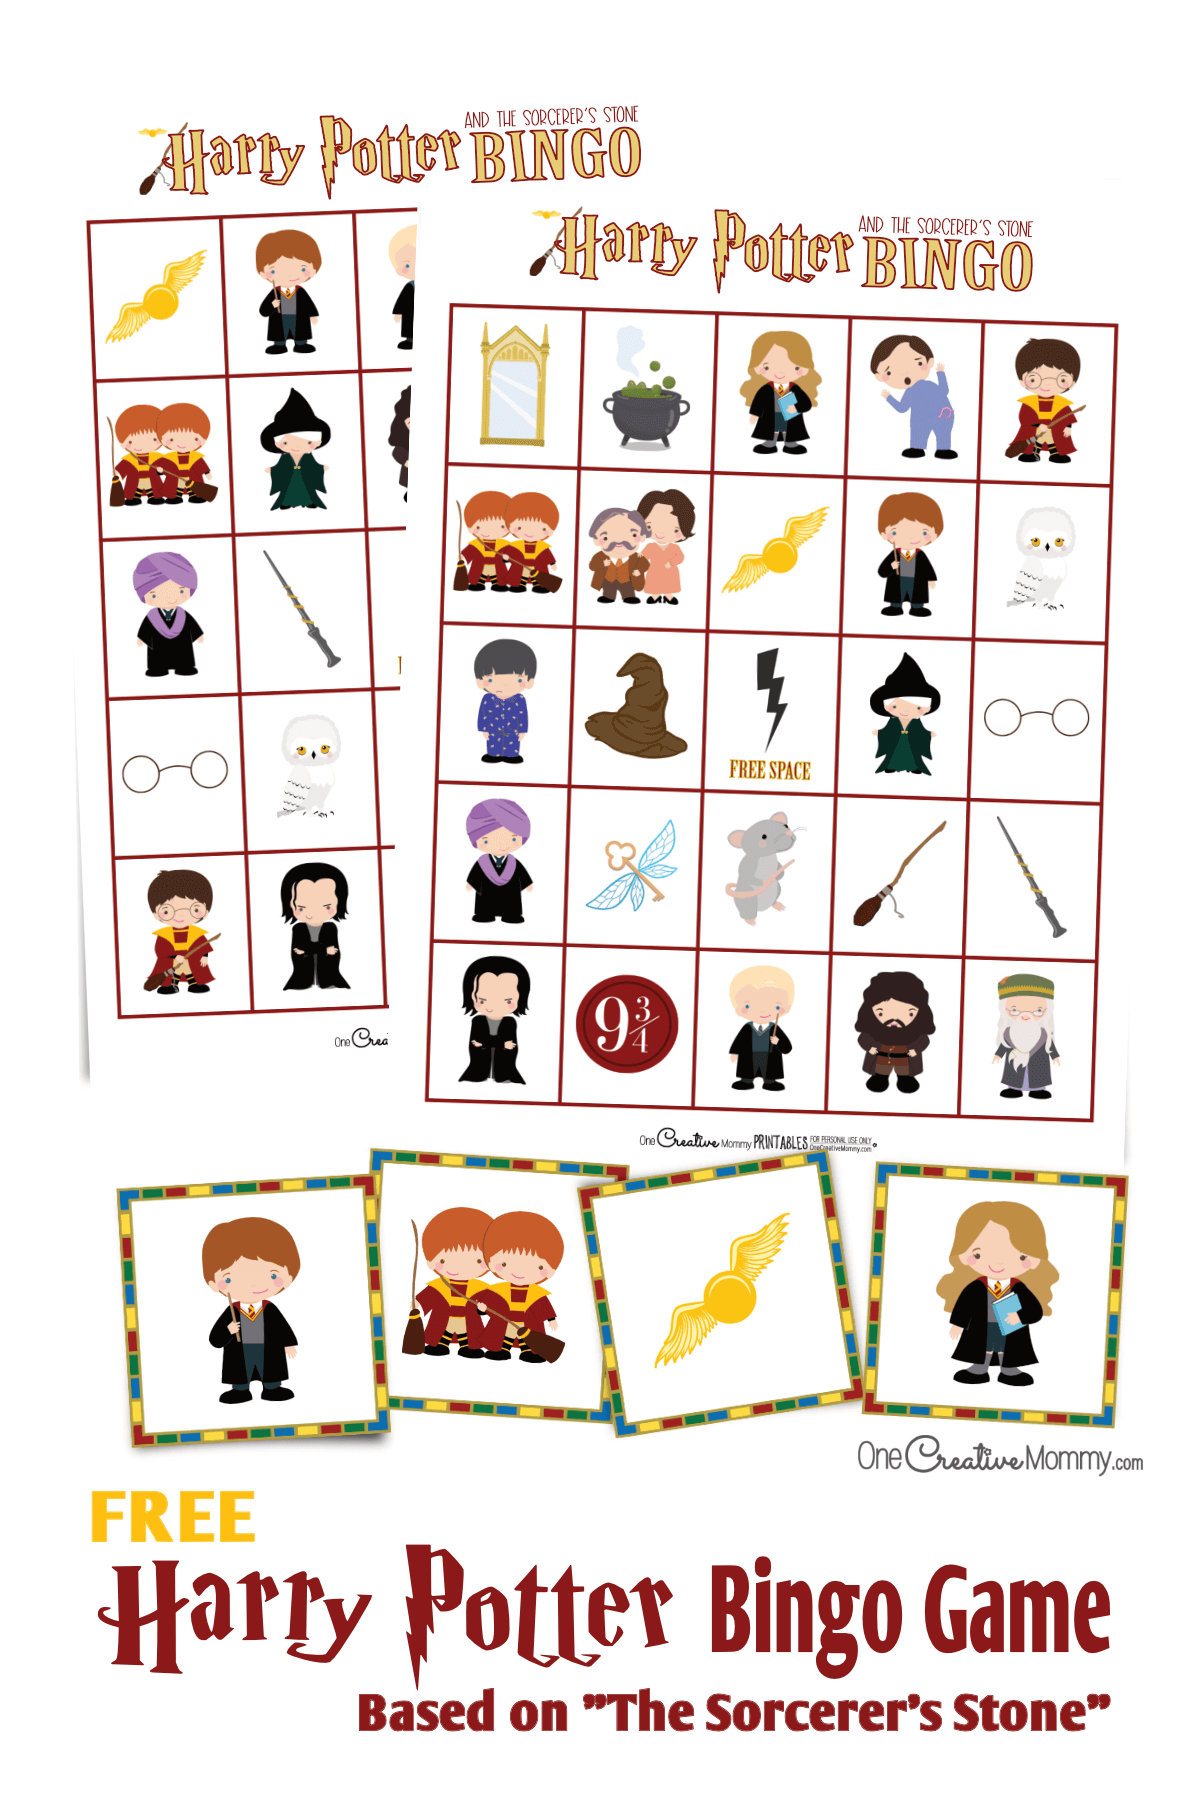 Free Harry Potter Bingo game! Because the images are based on Book 1, even the newest Harry Potter fan can play. {OneCreativeMommy.com} Free family set with class set available on Etsy #harrypotterbingo #harrypotterbirthdayparty #harrypotterparty #bingogame